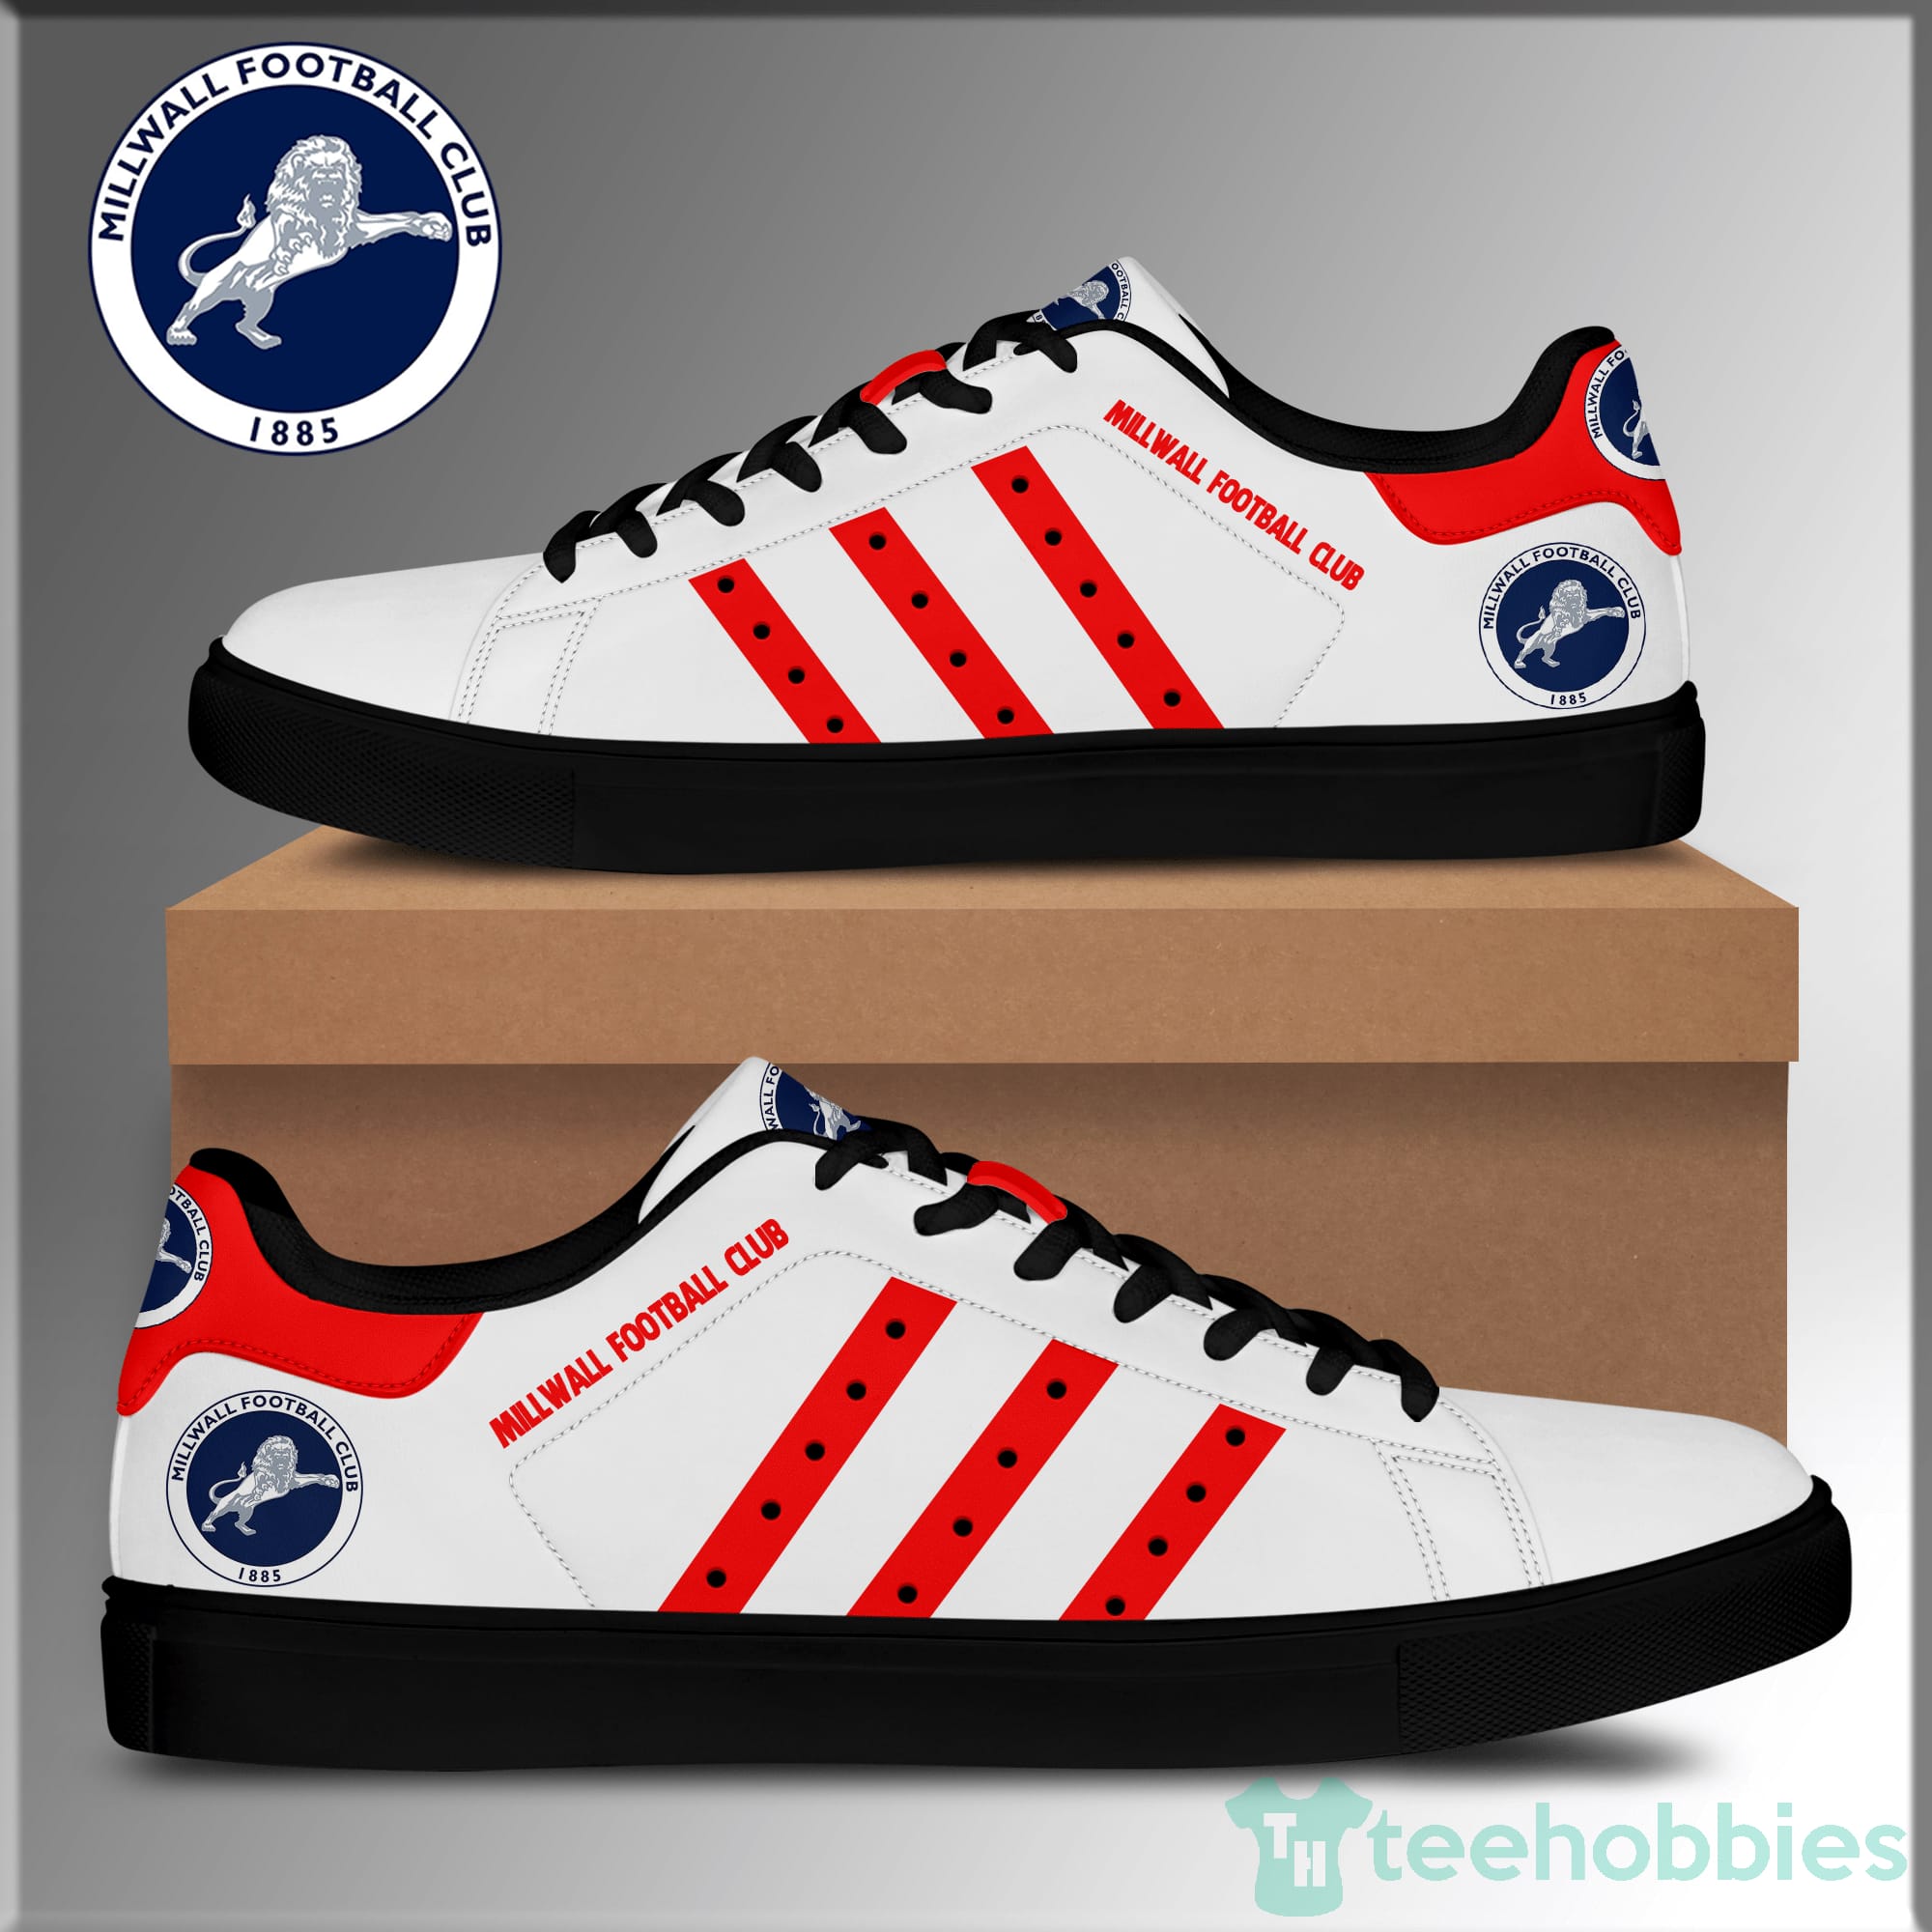 Millwall Football Club Red Striped Low Top Skate Shoes Product photo 2